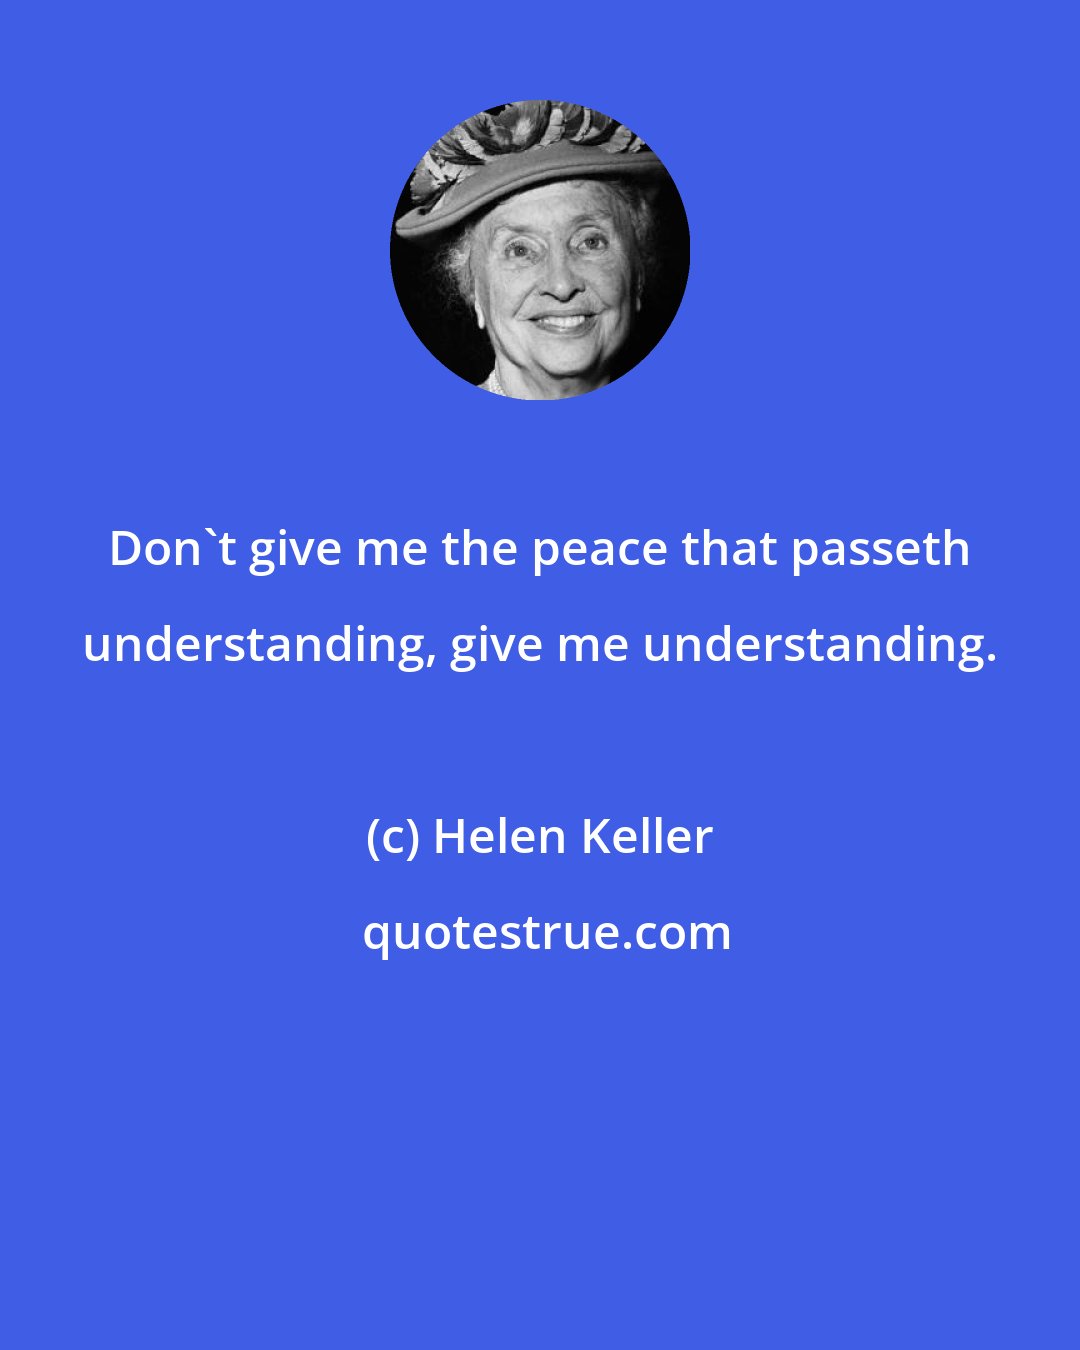 Helen Keller: Don't give me the peace that passeth understanding, give me understanding.